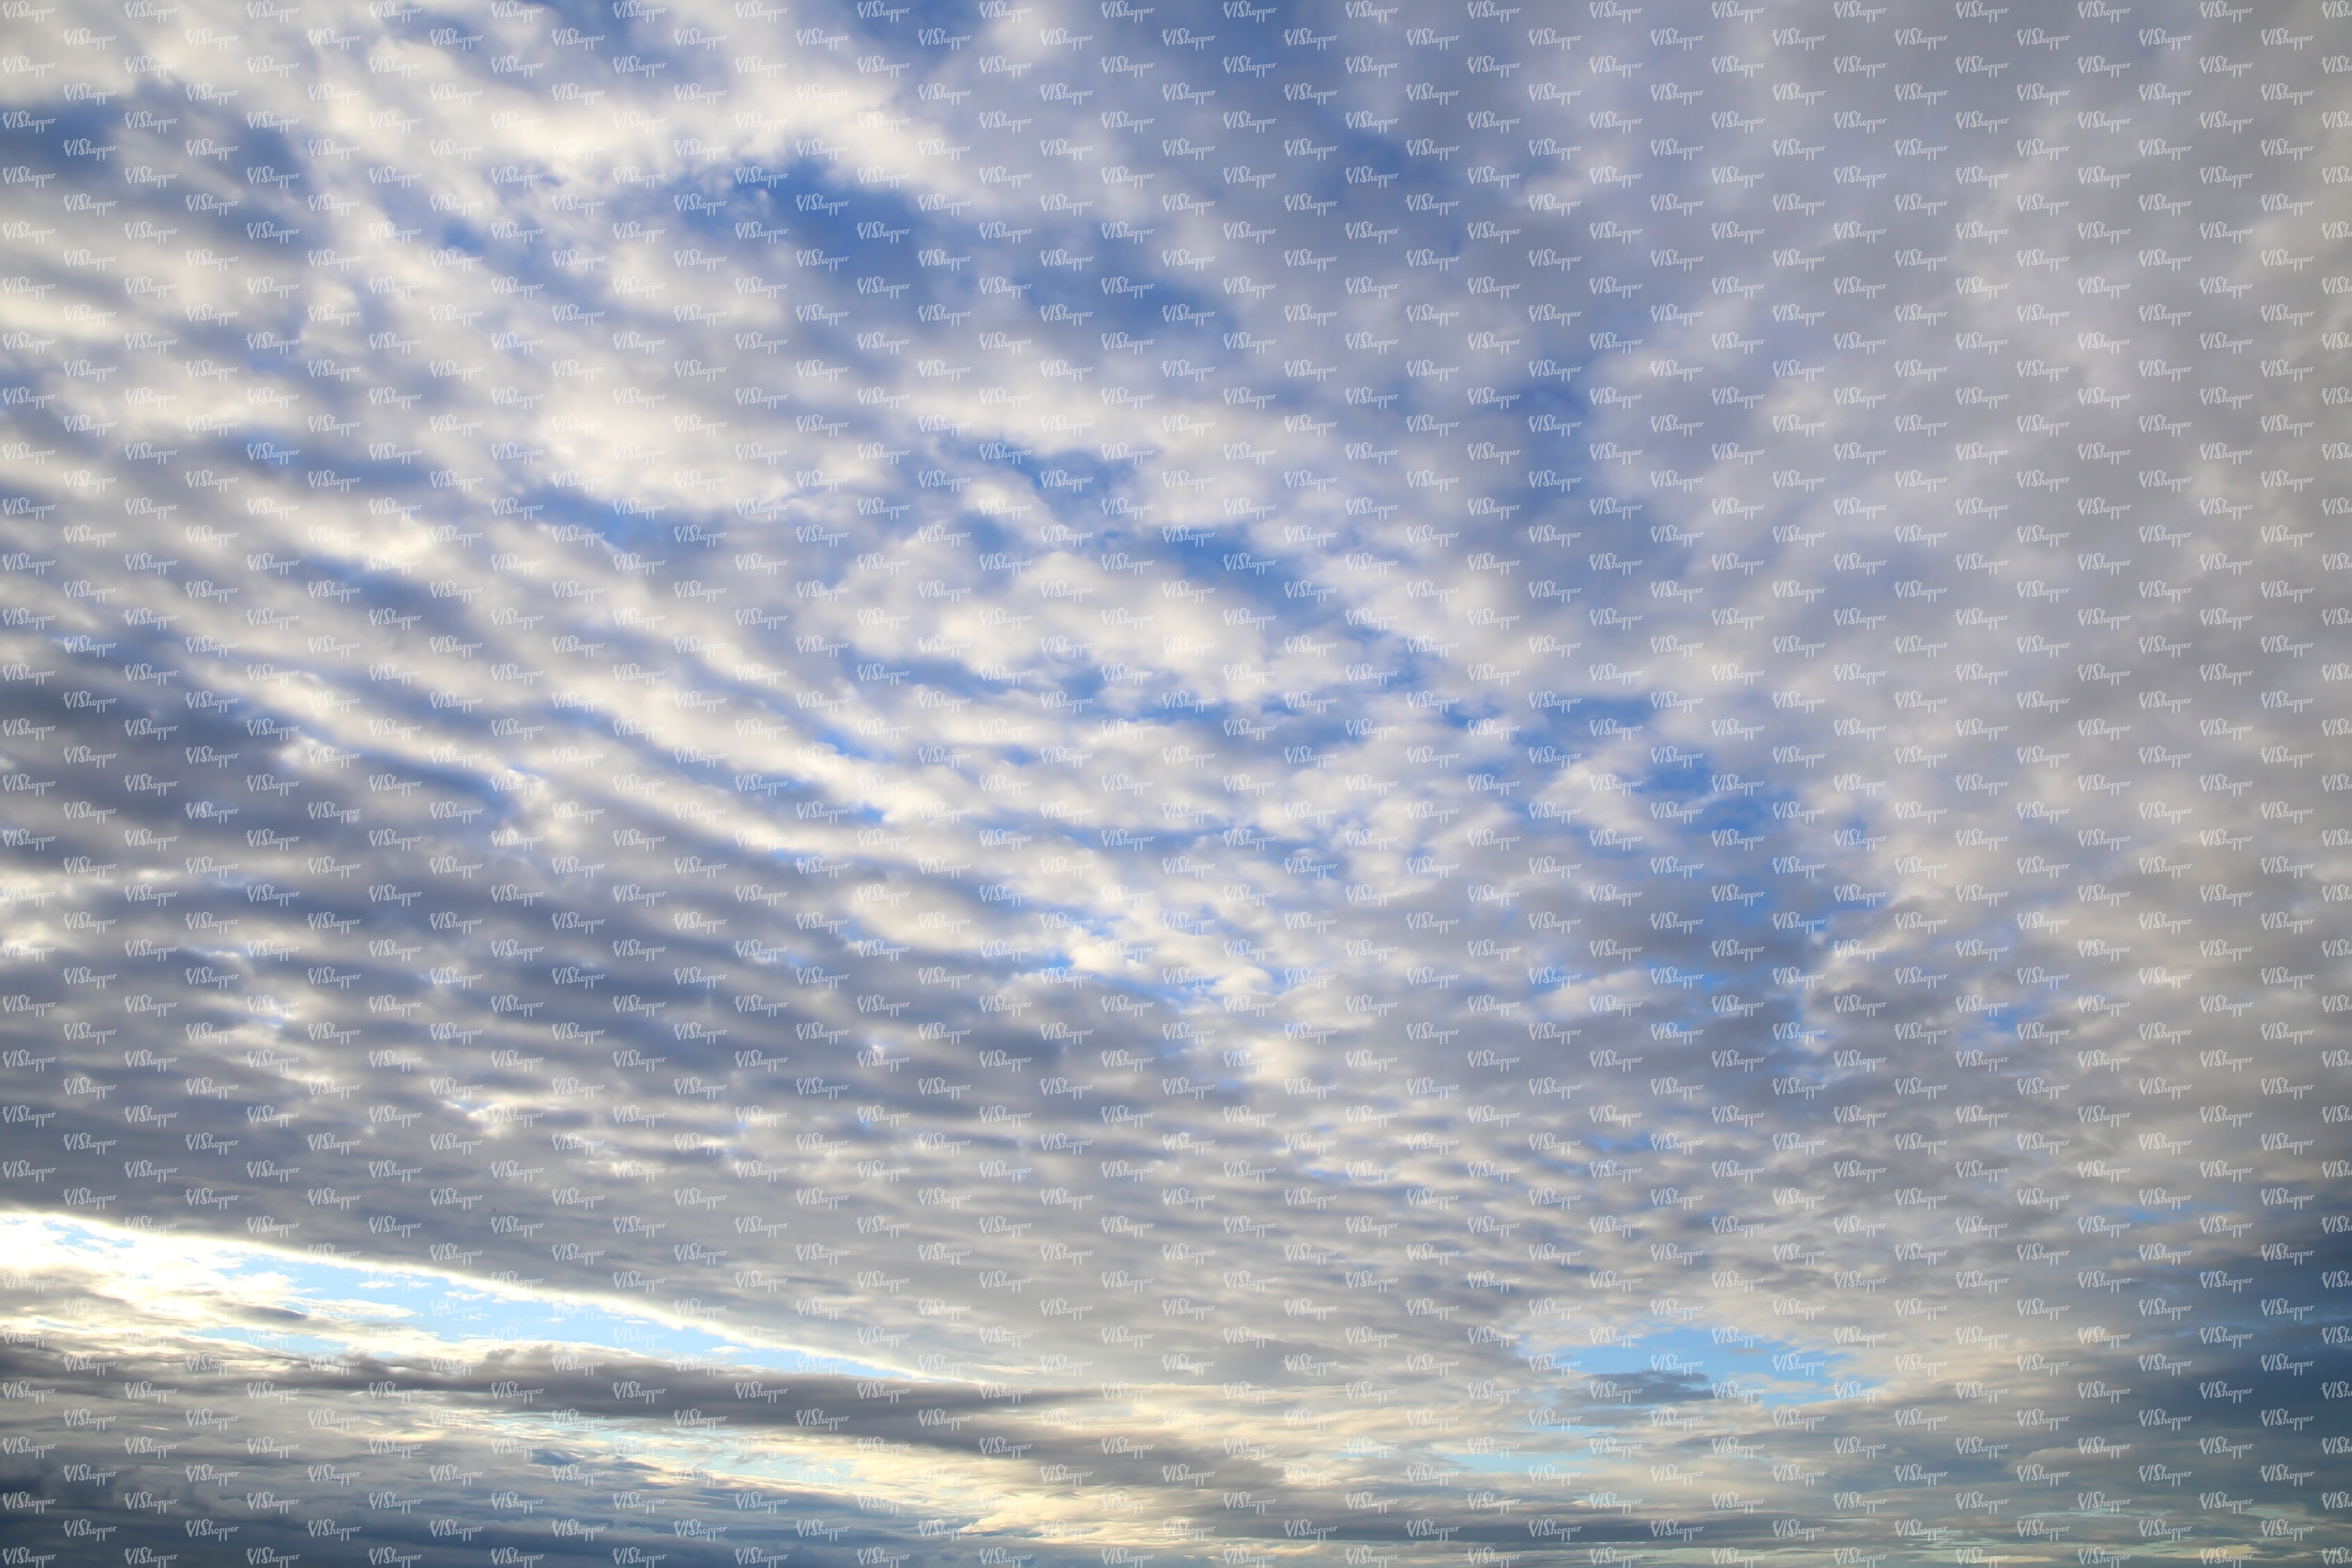 evening sky with a thick layer of stratus clouds - sky textures ...